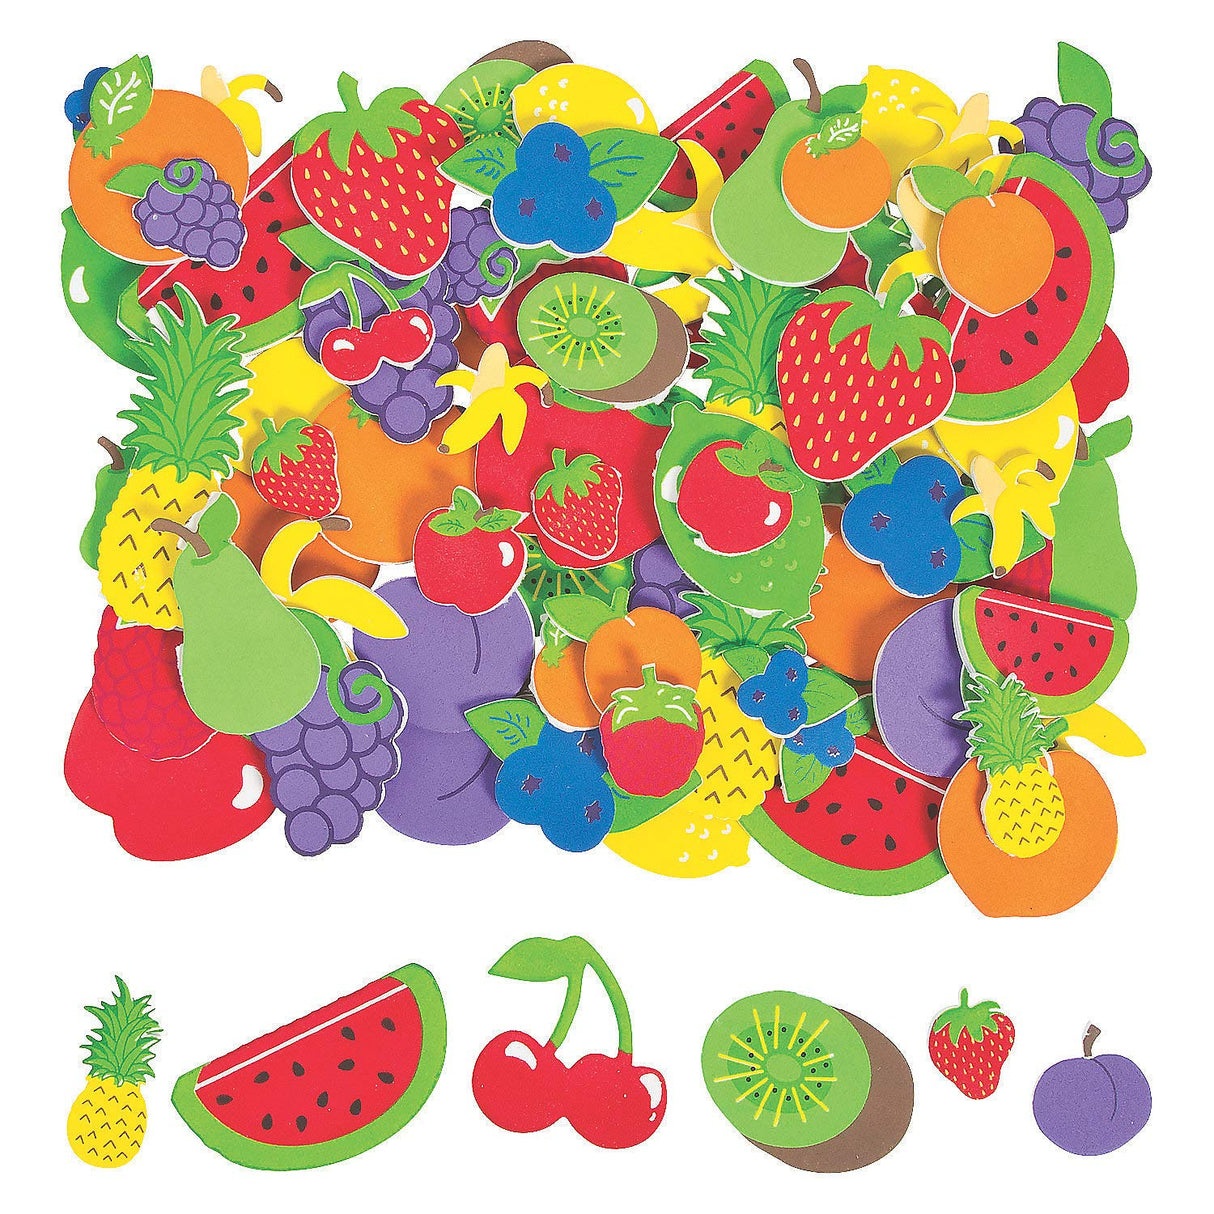 Fabulous Foam Fruit Shapes - 500 Pieces - Crafts for Kids and Fun Home Activities